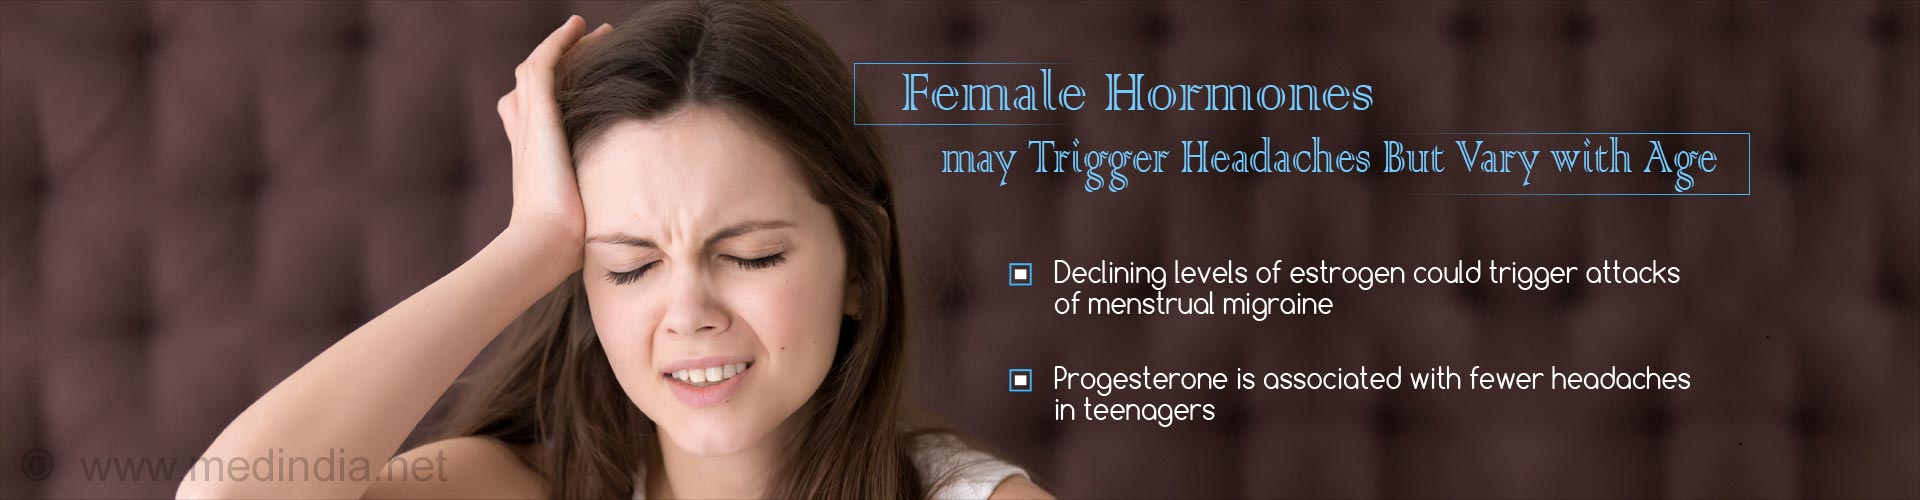 female hormones may trigger headaches but vary with age
- declining levels of estrogen could trigger attacks of menstrual migraine
- progesterone is associated with fewer headaches in teenagers